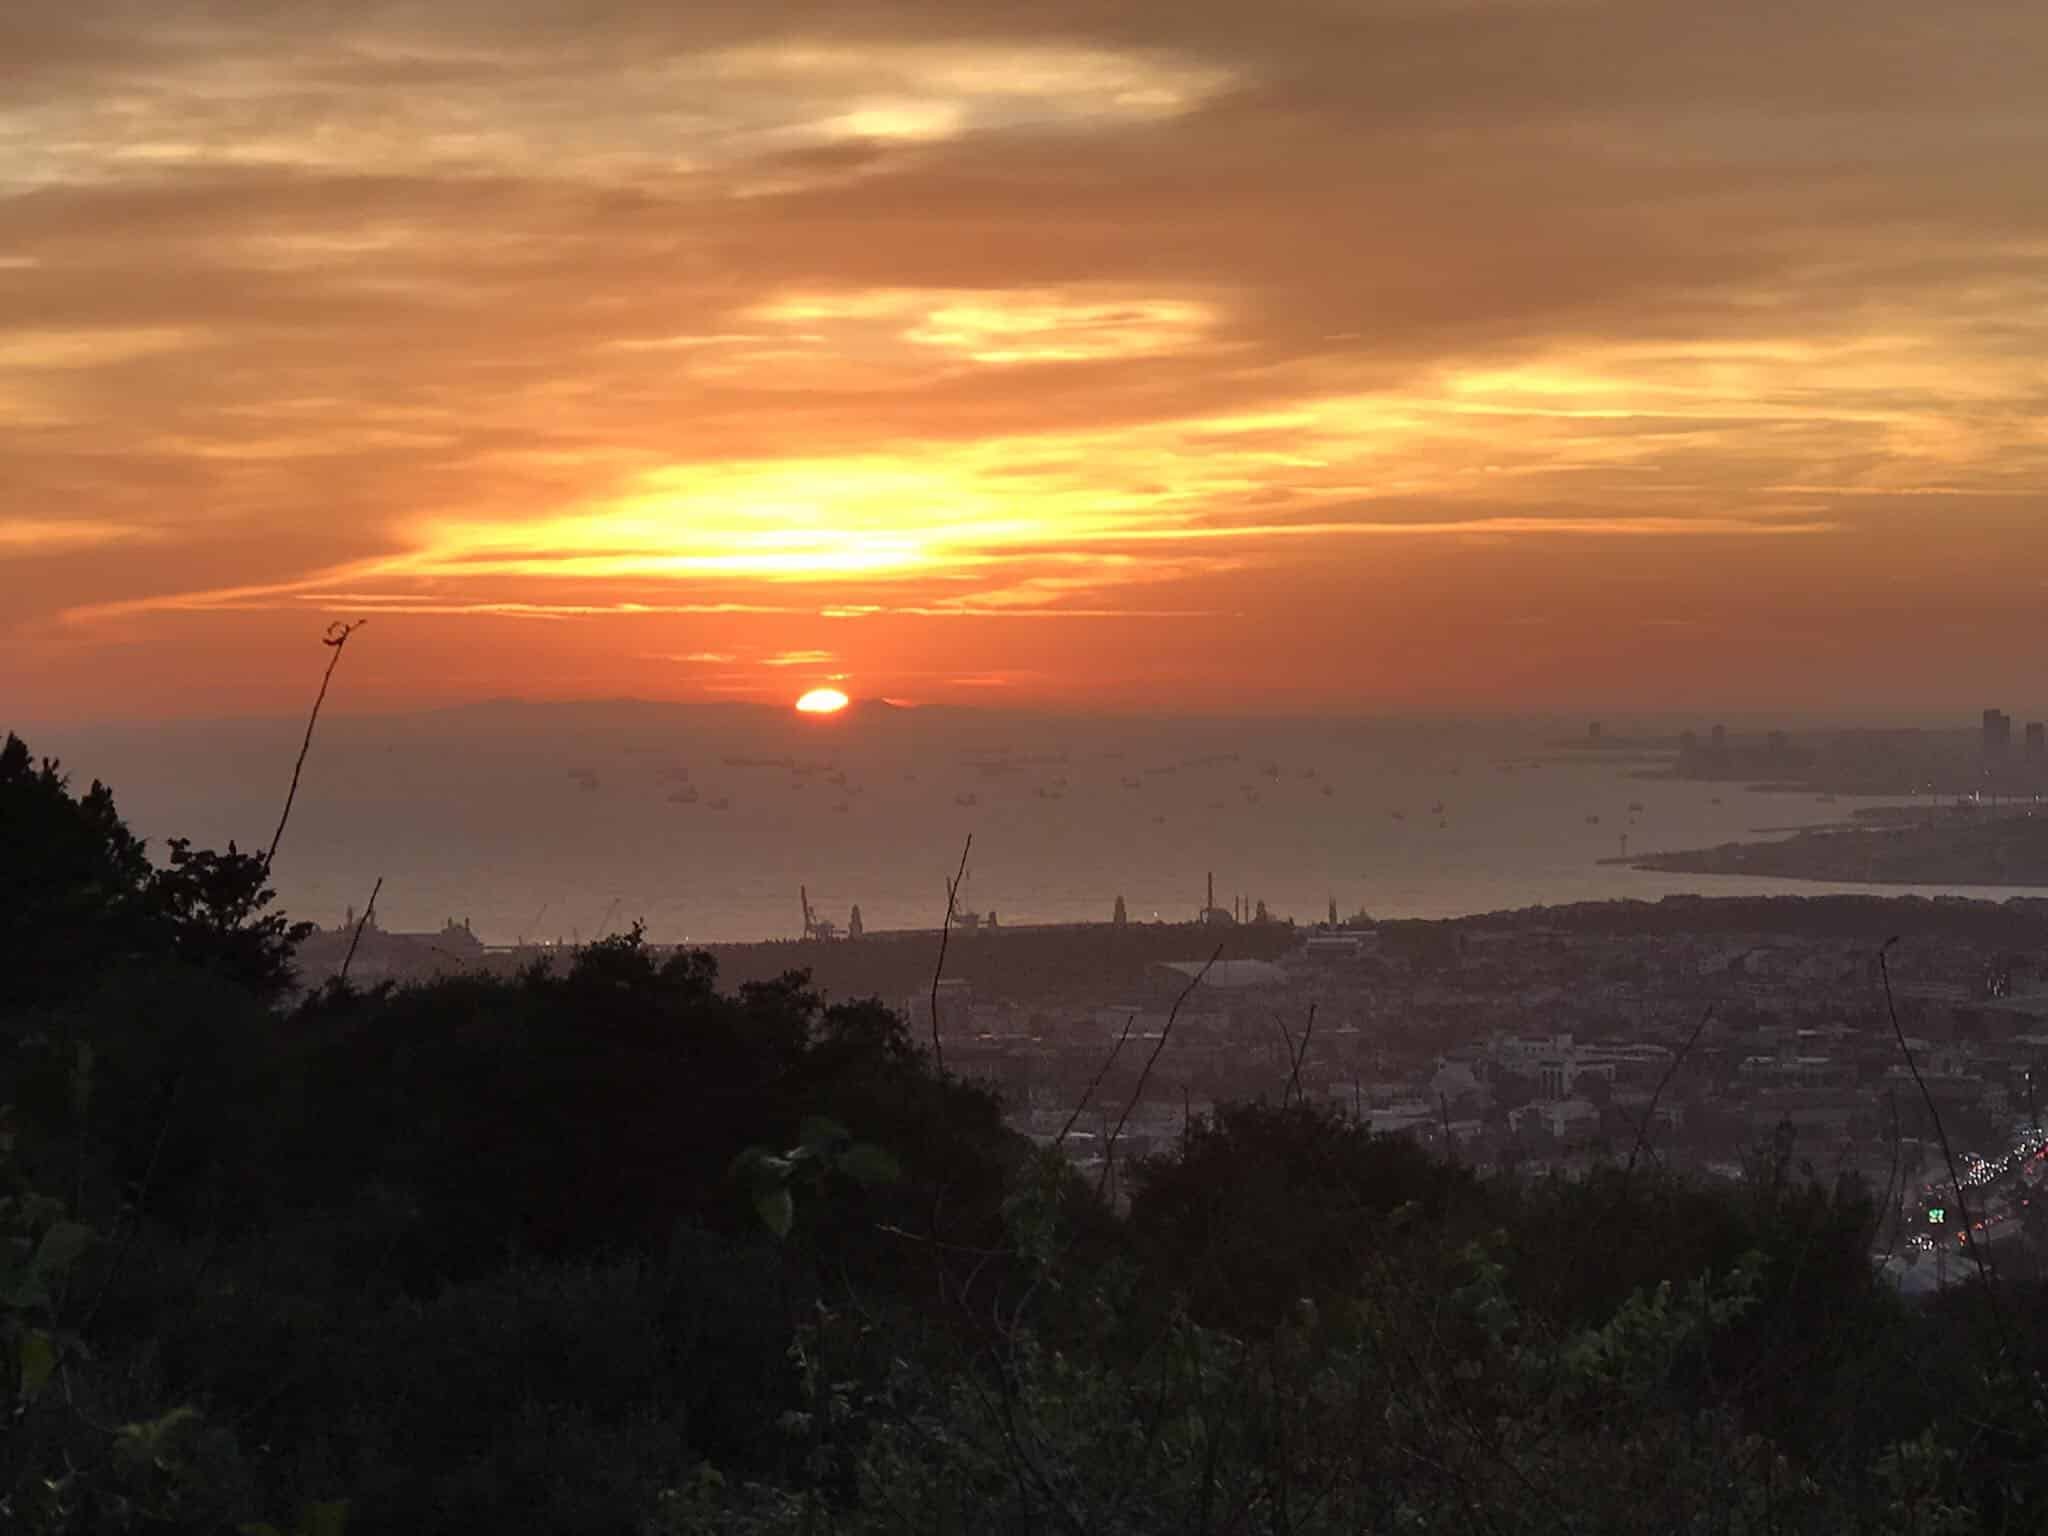 The sun is setting over the city of barcelona.